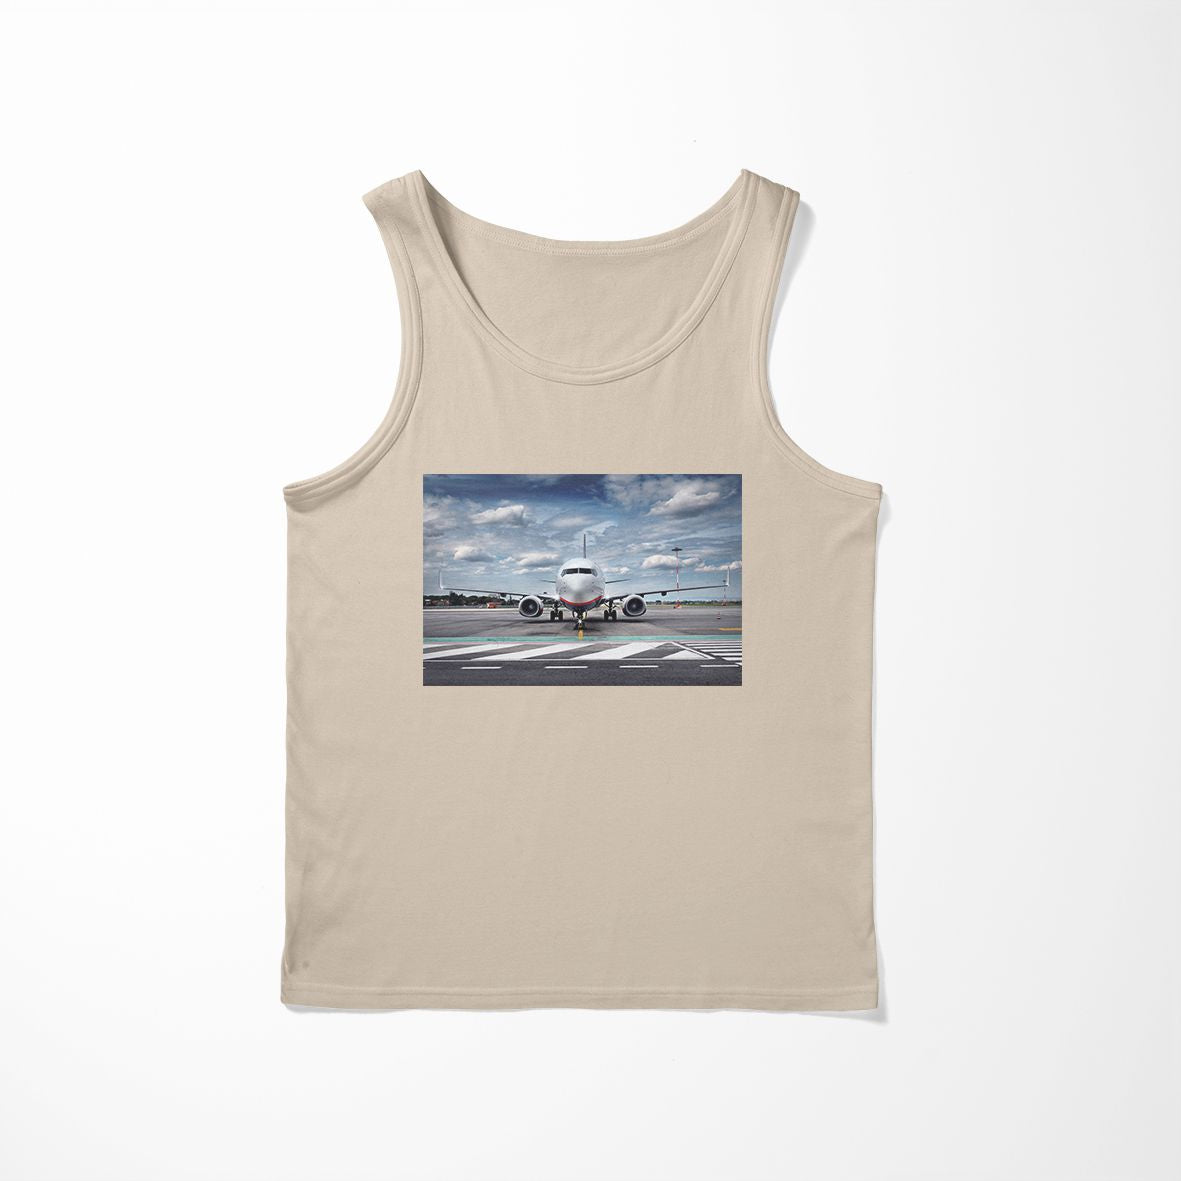 Amazing Clouds and Boeing 737 NG Designed Tank Tops